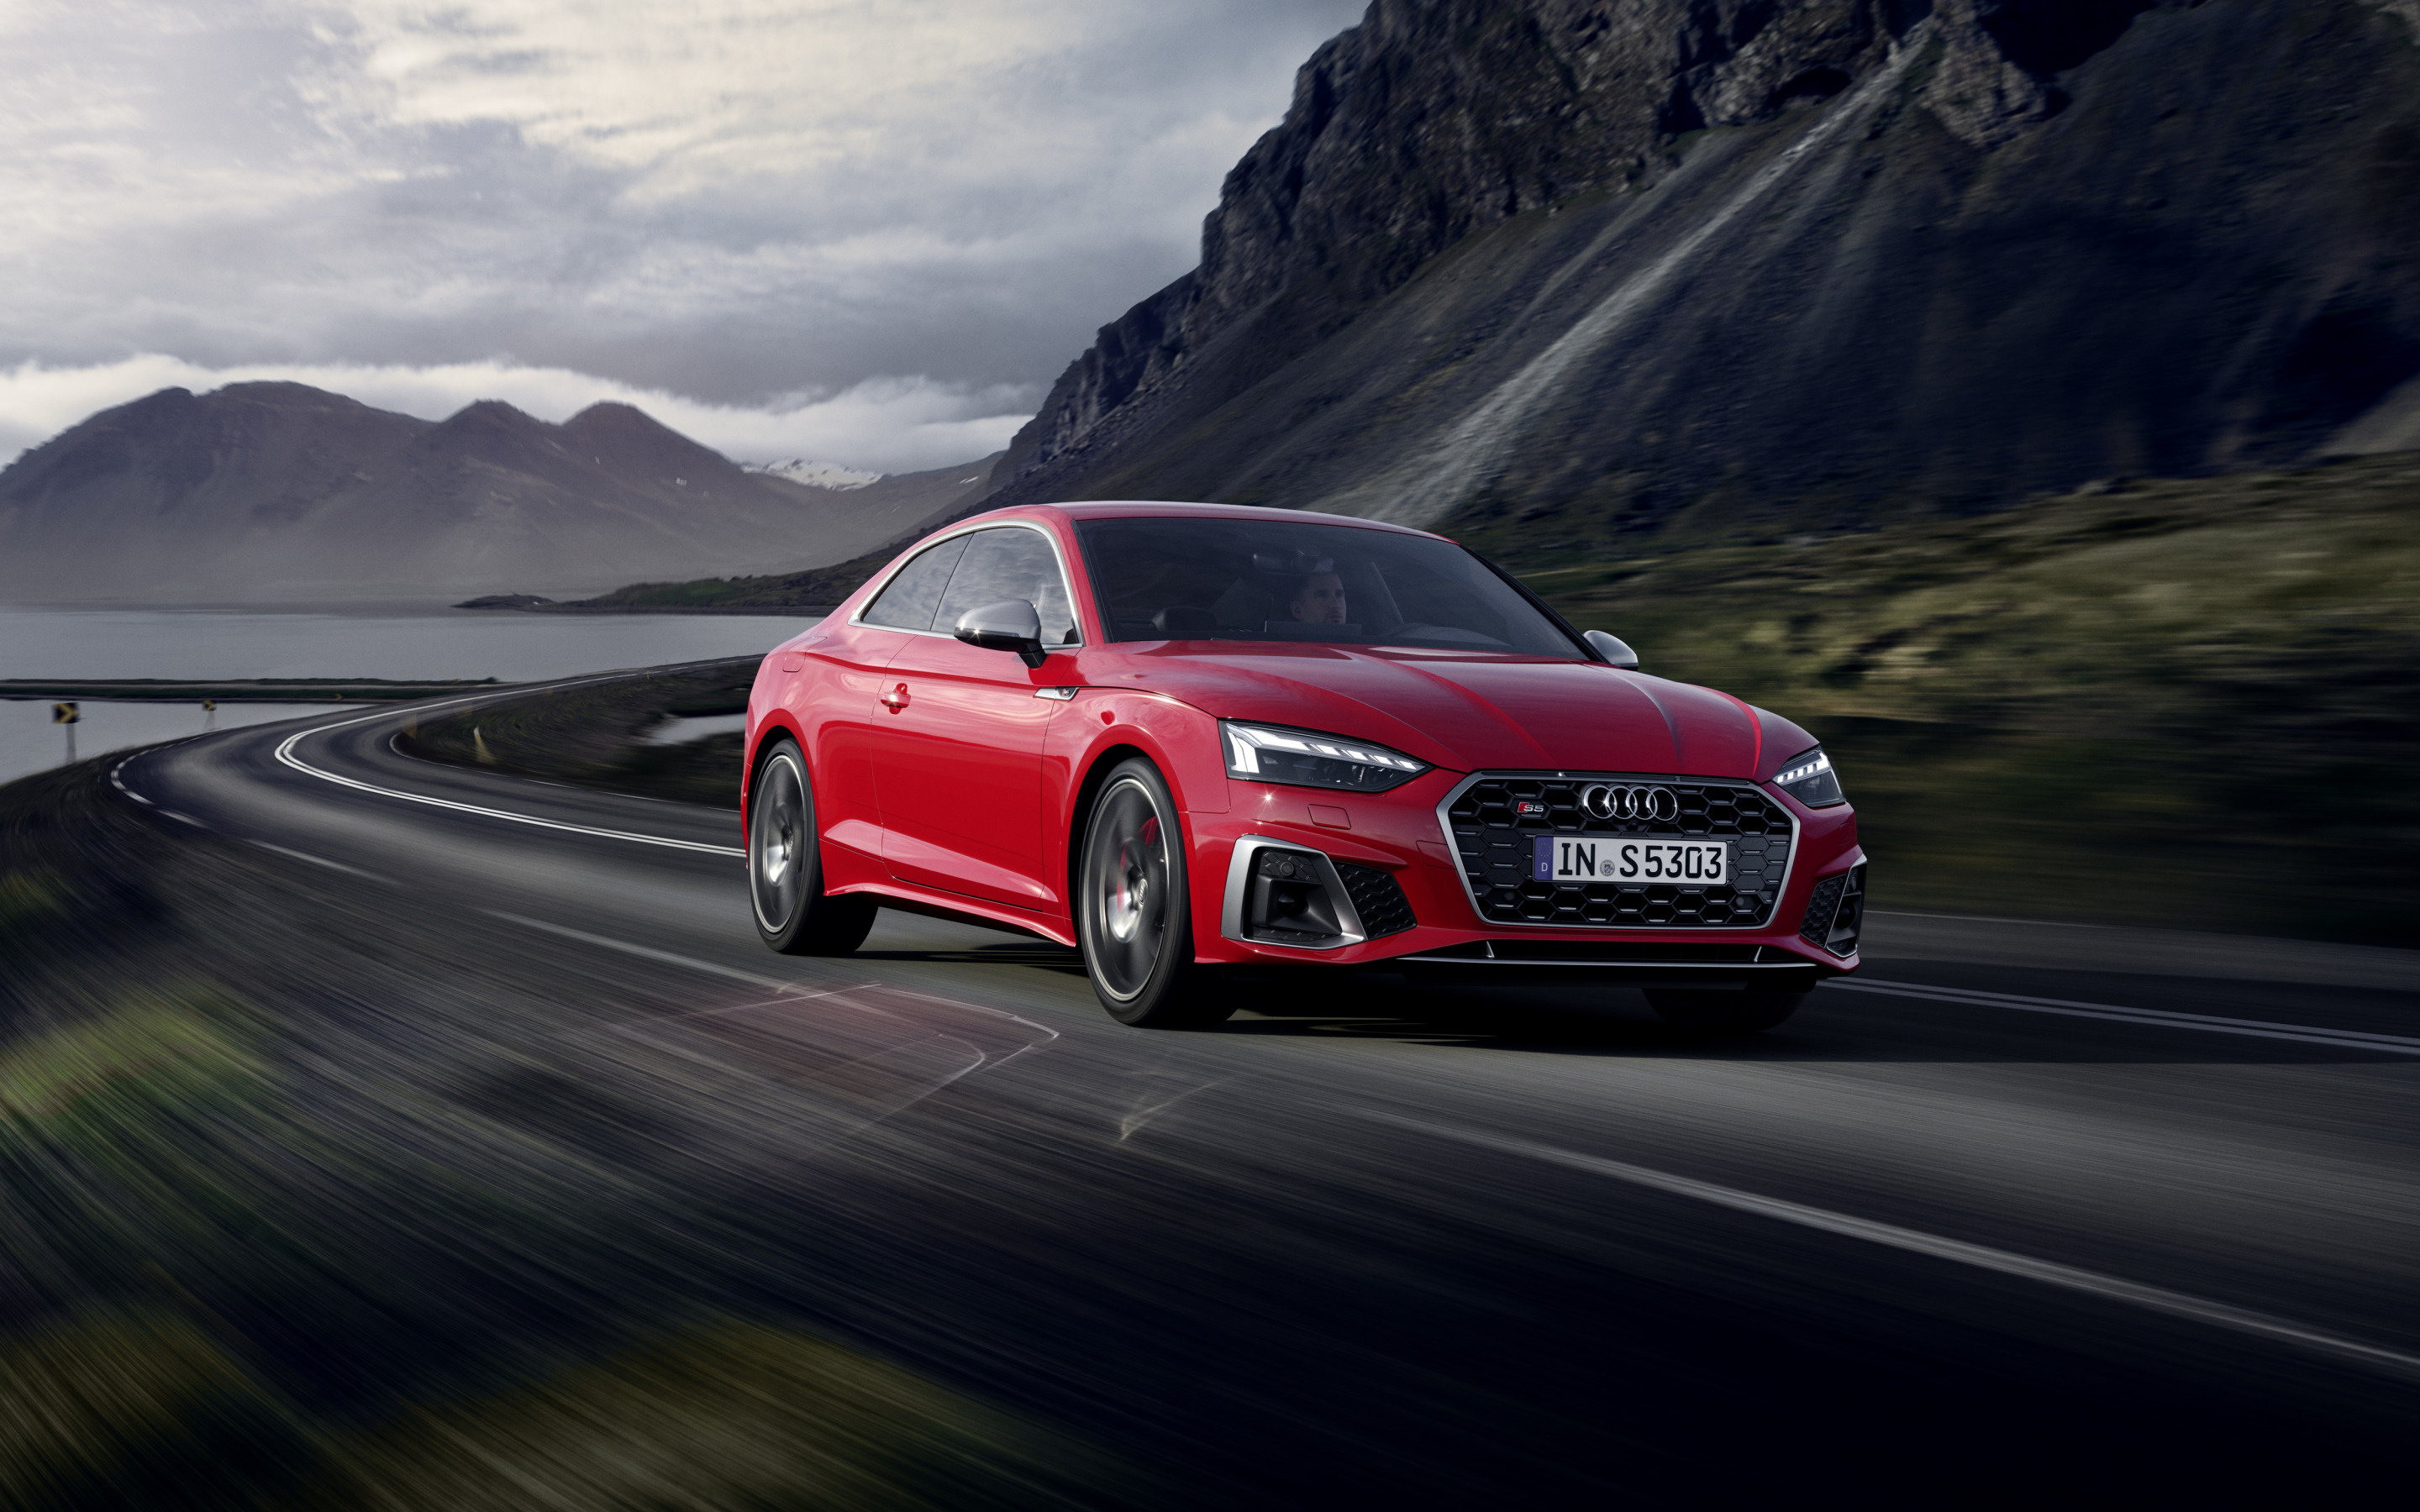 Audi S5 Coupe 2020, Red exterior, High-performance luxury, Elegance in motion, 2880x1800 HD Desktop